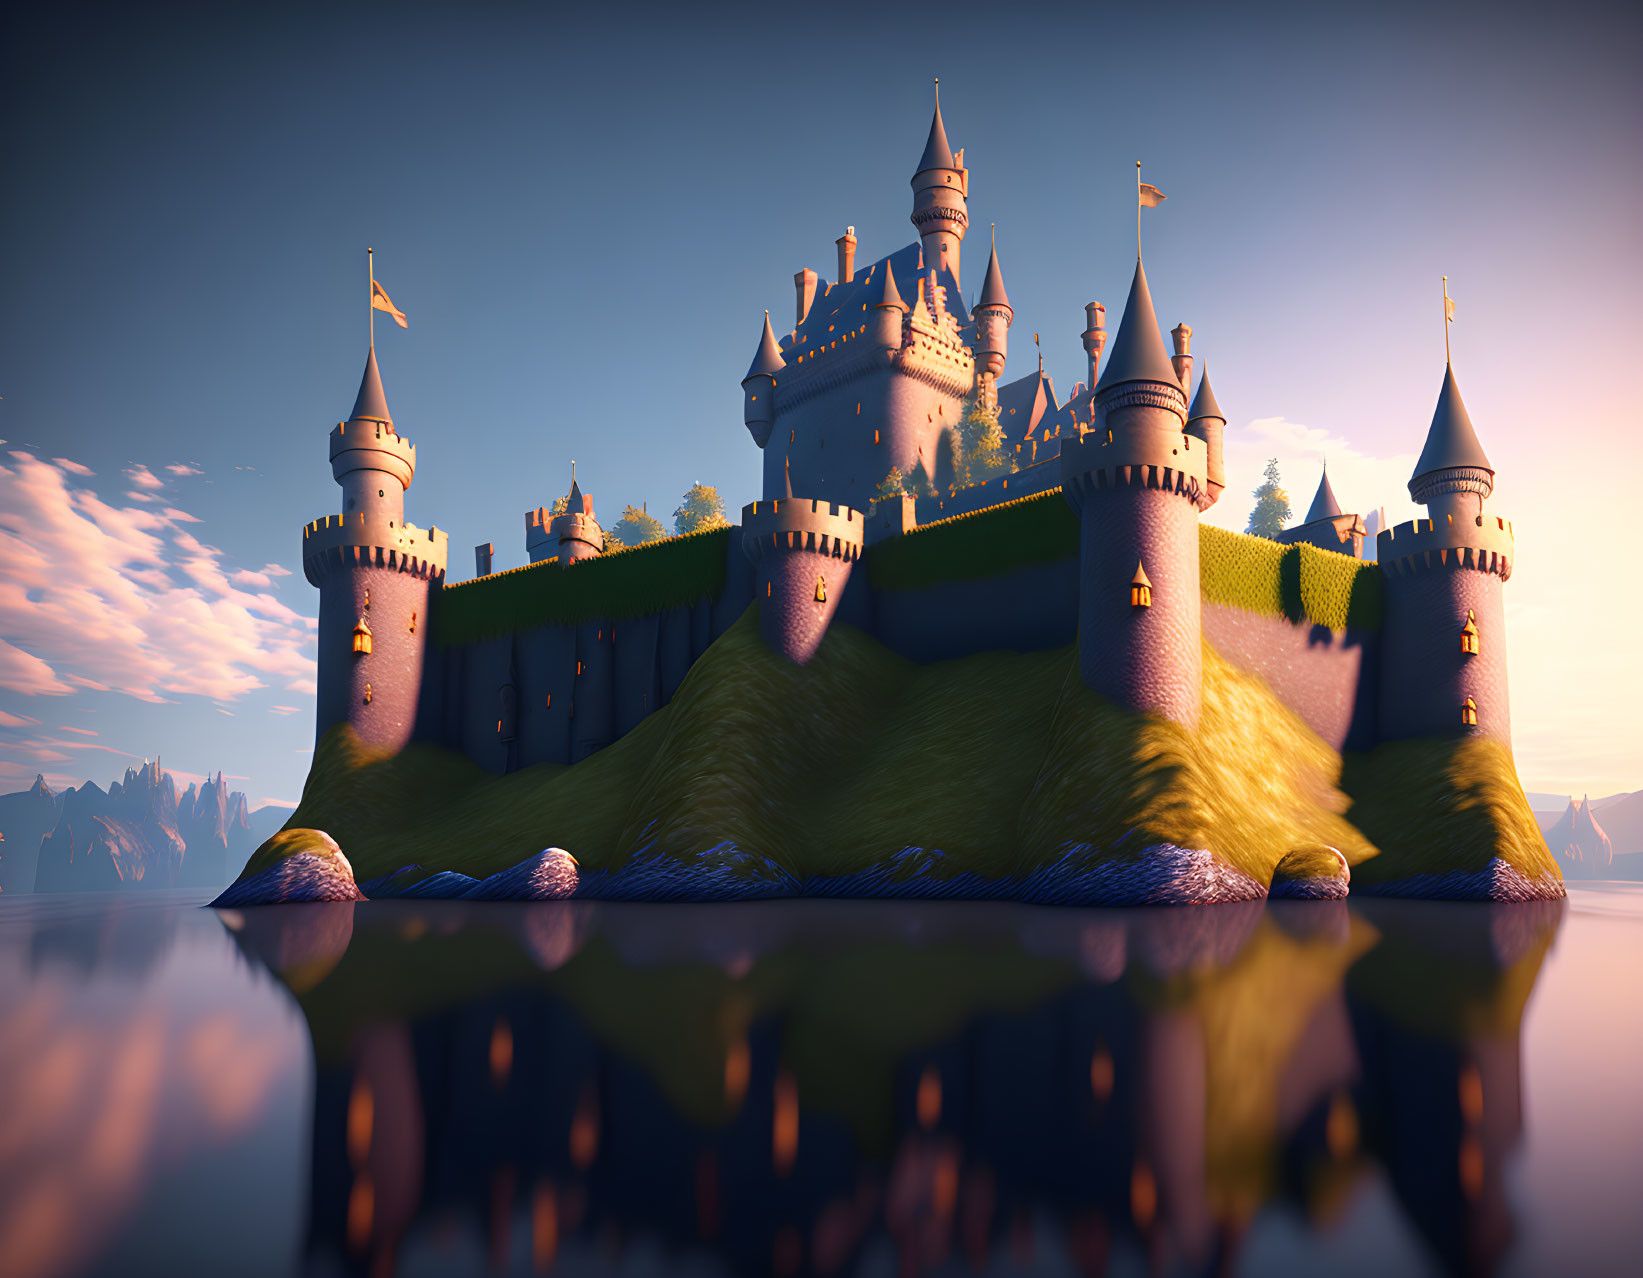 Majestic castle with multiple spires on lush green hill at twilight